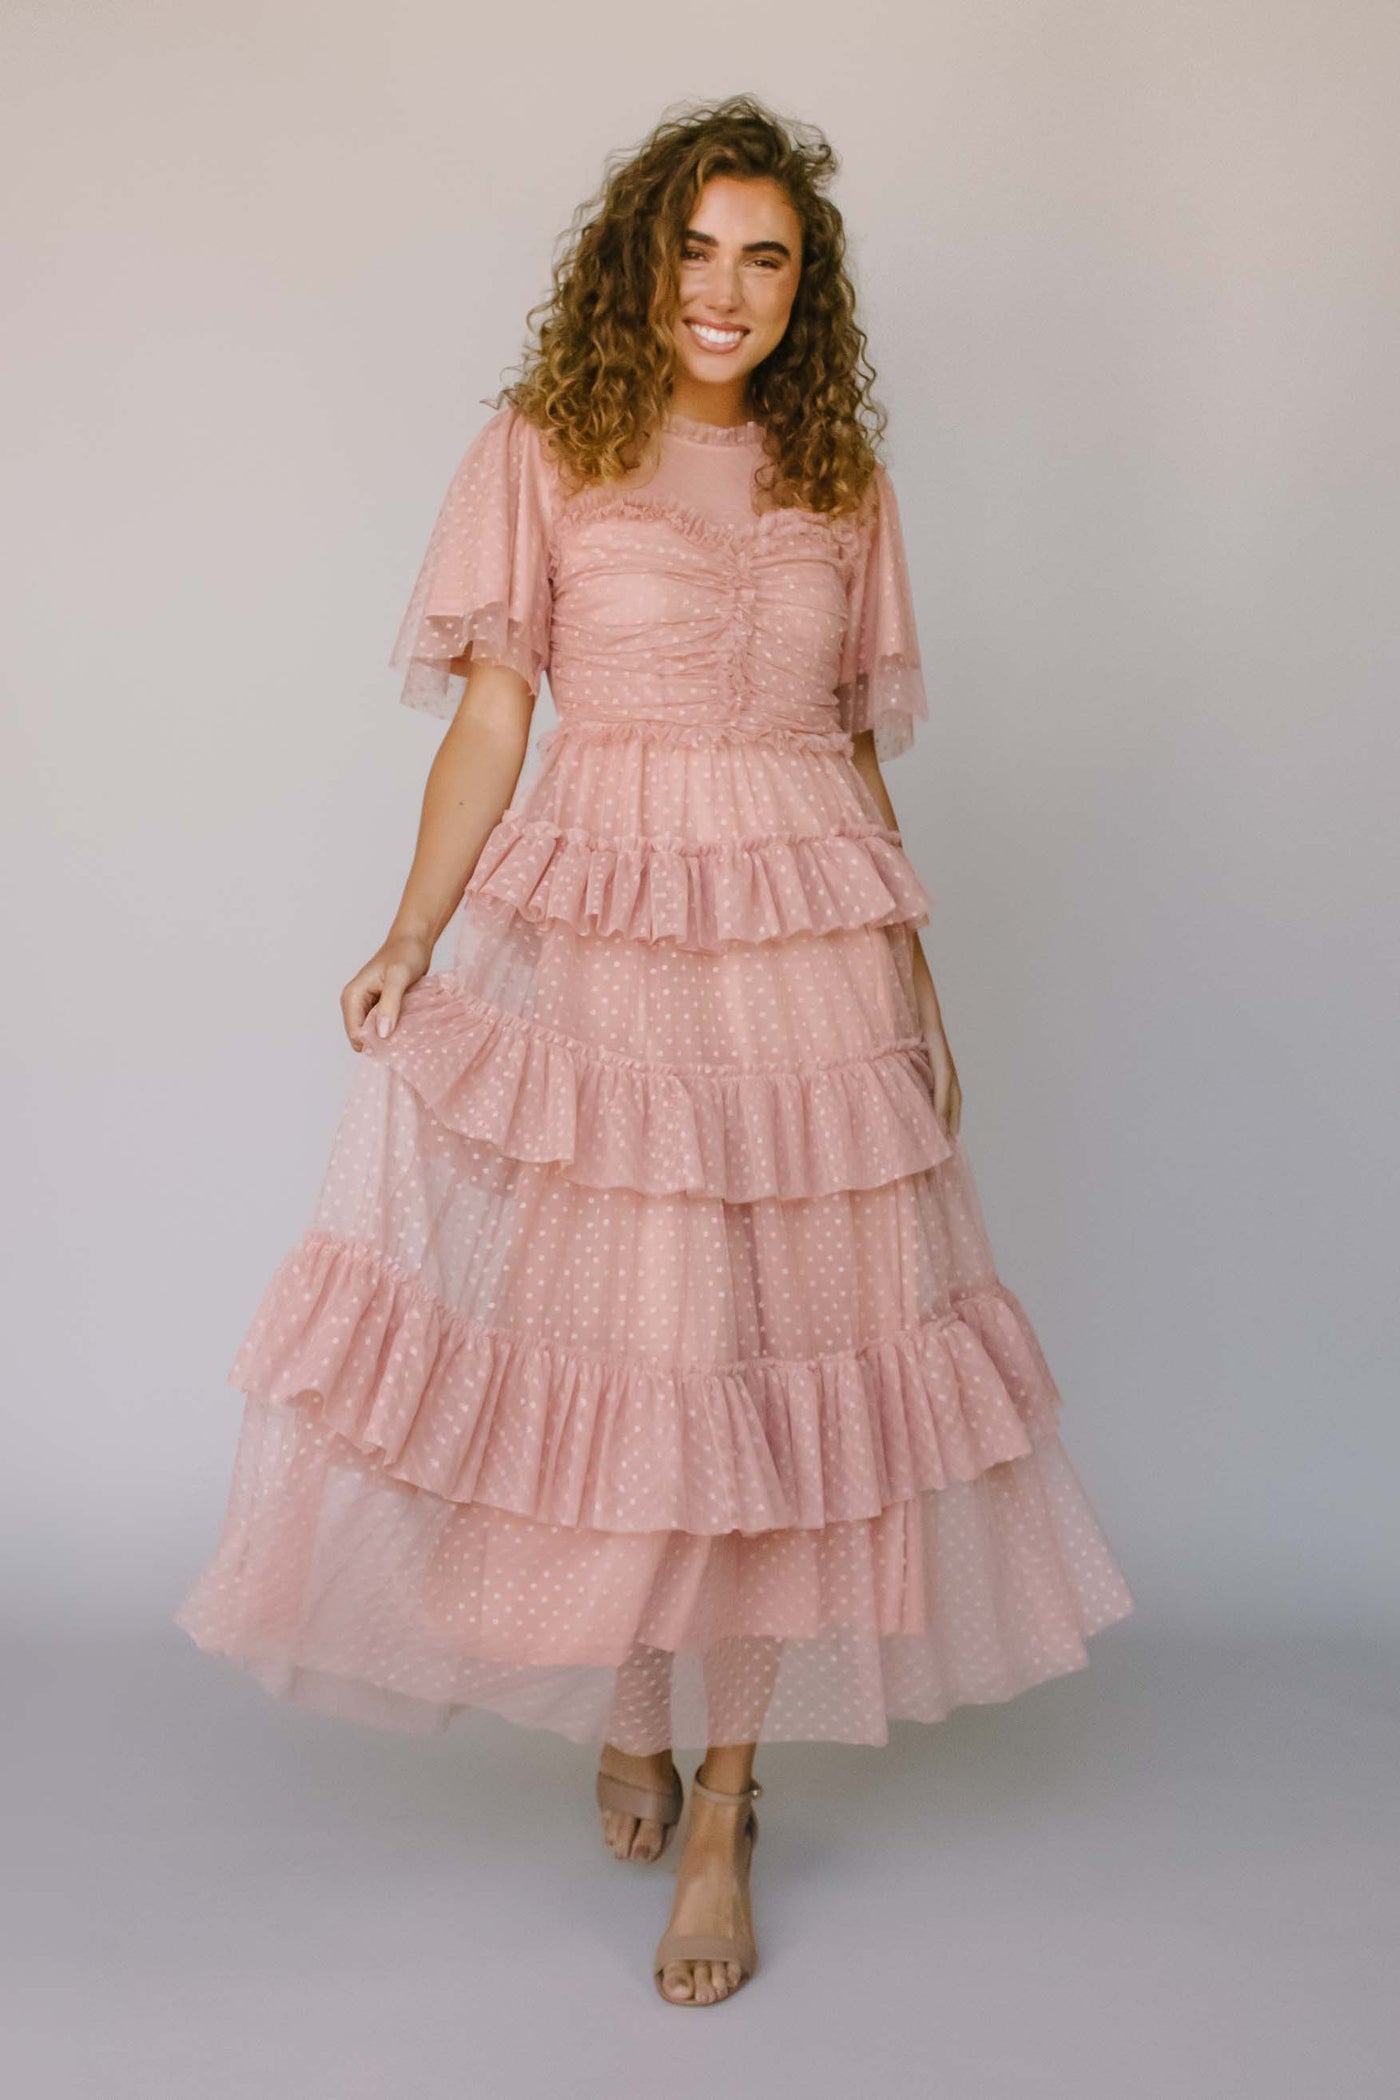 A modest dress in the color blush pink with a fun dotted fabric, layered tiers, and flutter sleeves. It also features a fun smocked pattern on the bodice and a high neckline.